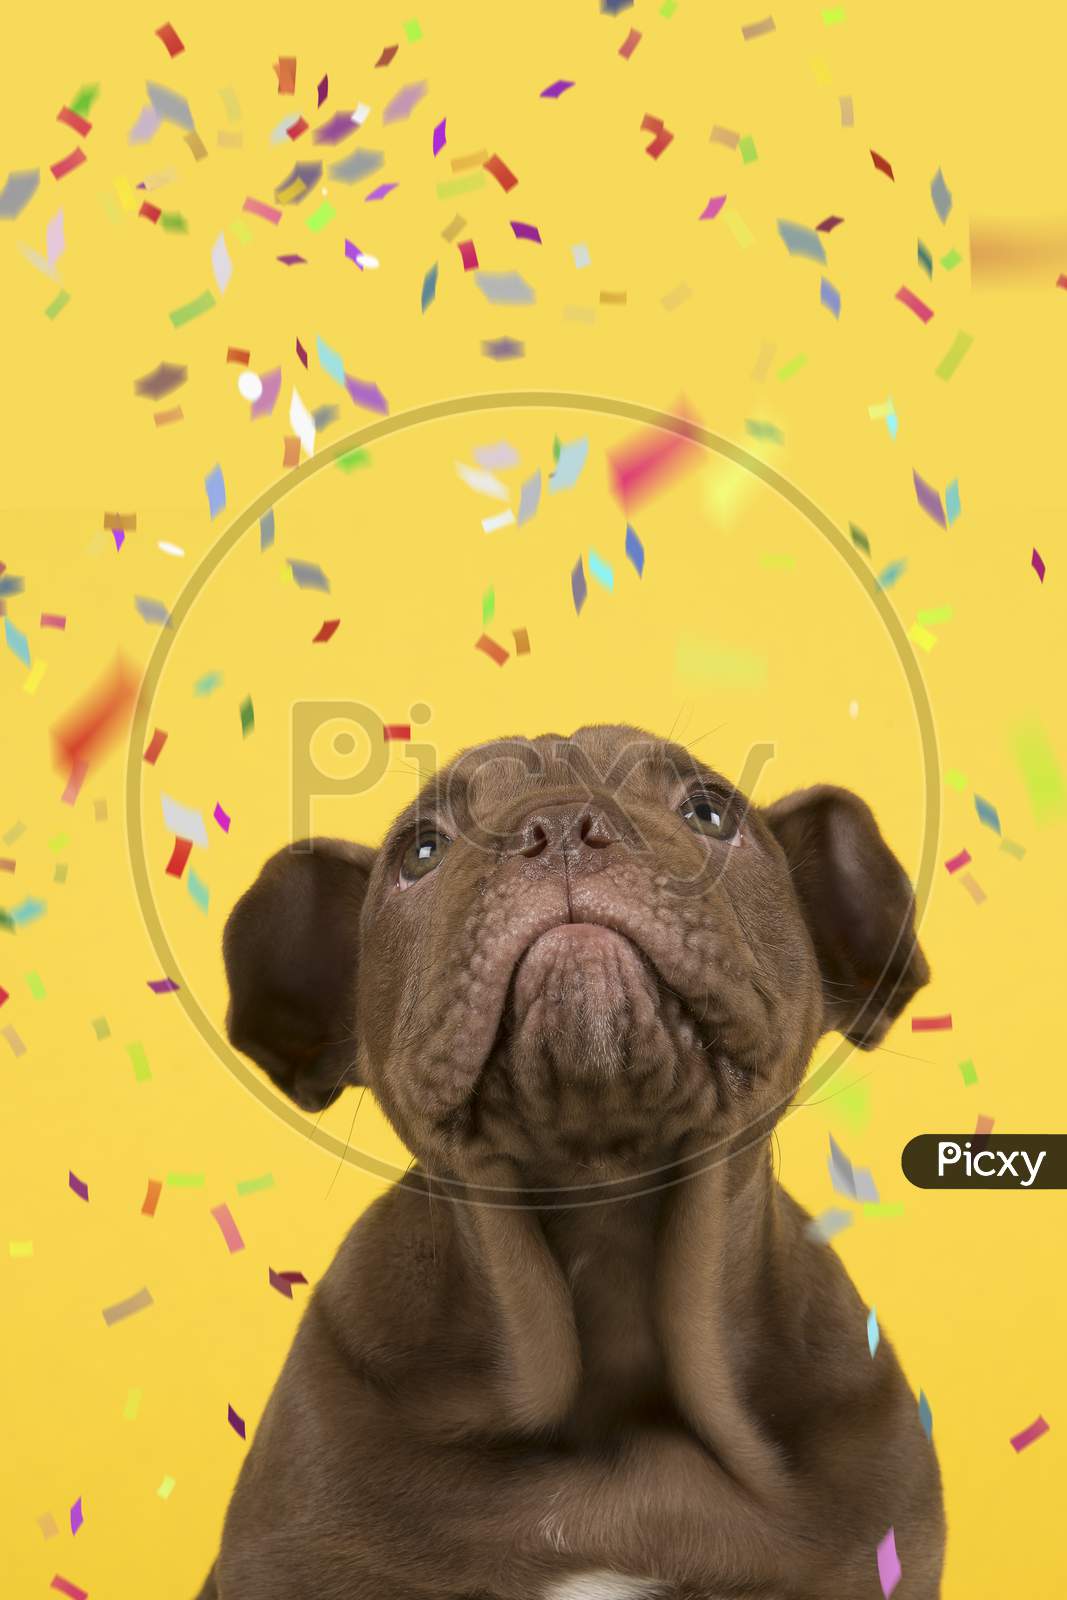 Portrait Of A Old English Bulldog Puppy Looking Up On A Yellow Background With Confetti In A Vertical Image